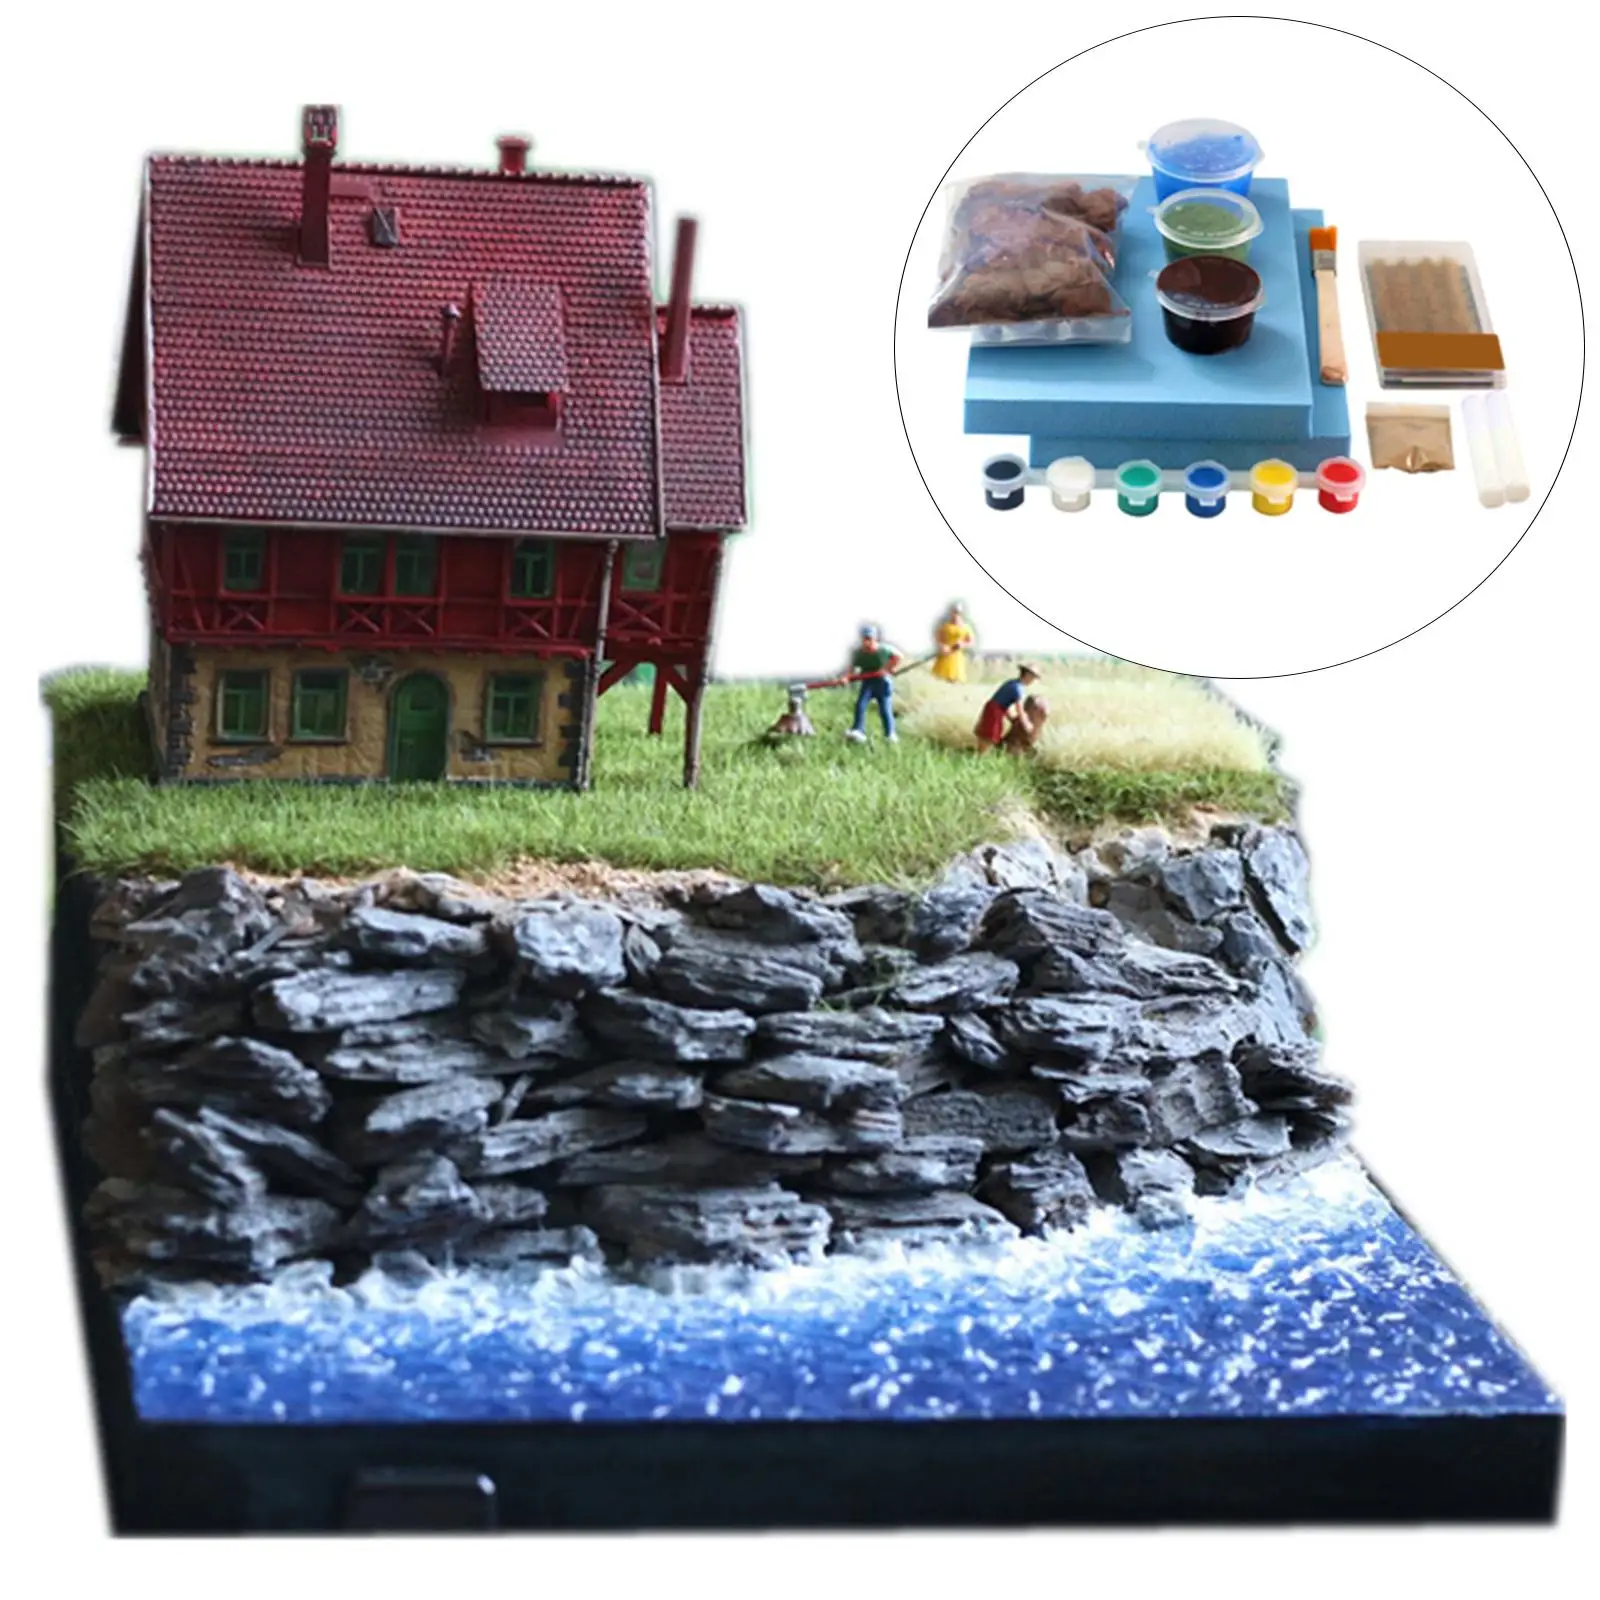 DIY Railway Scenery Kits Crafts Building Material for Accessories Layout